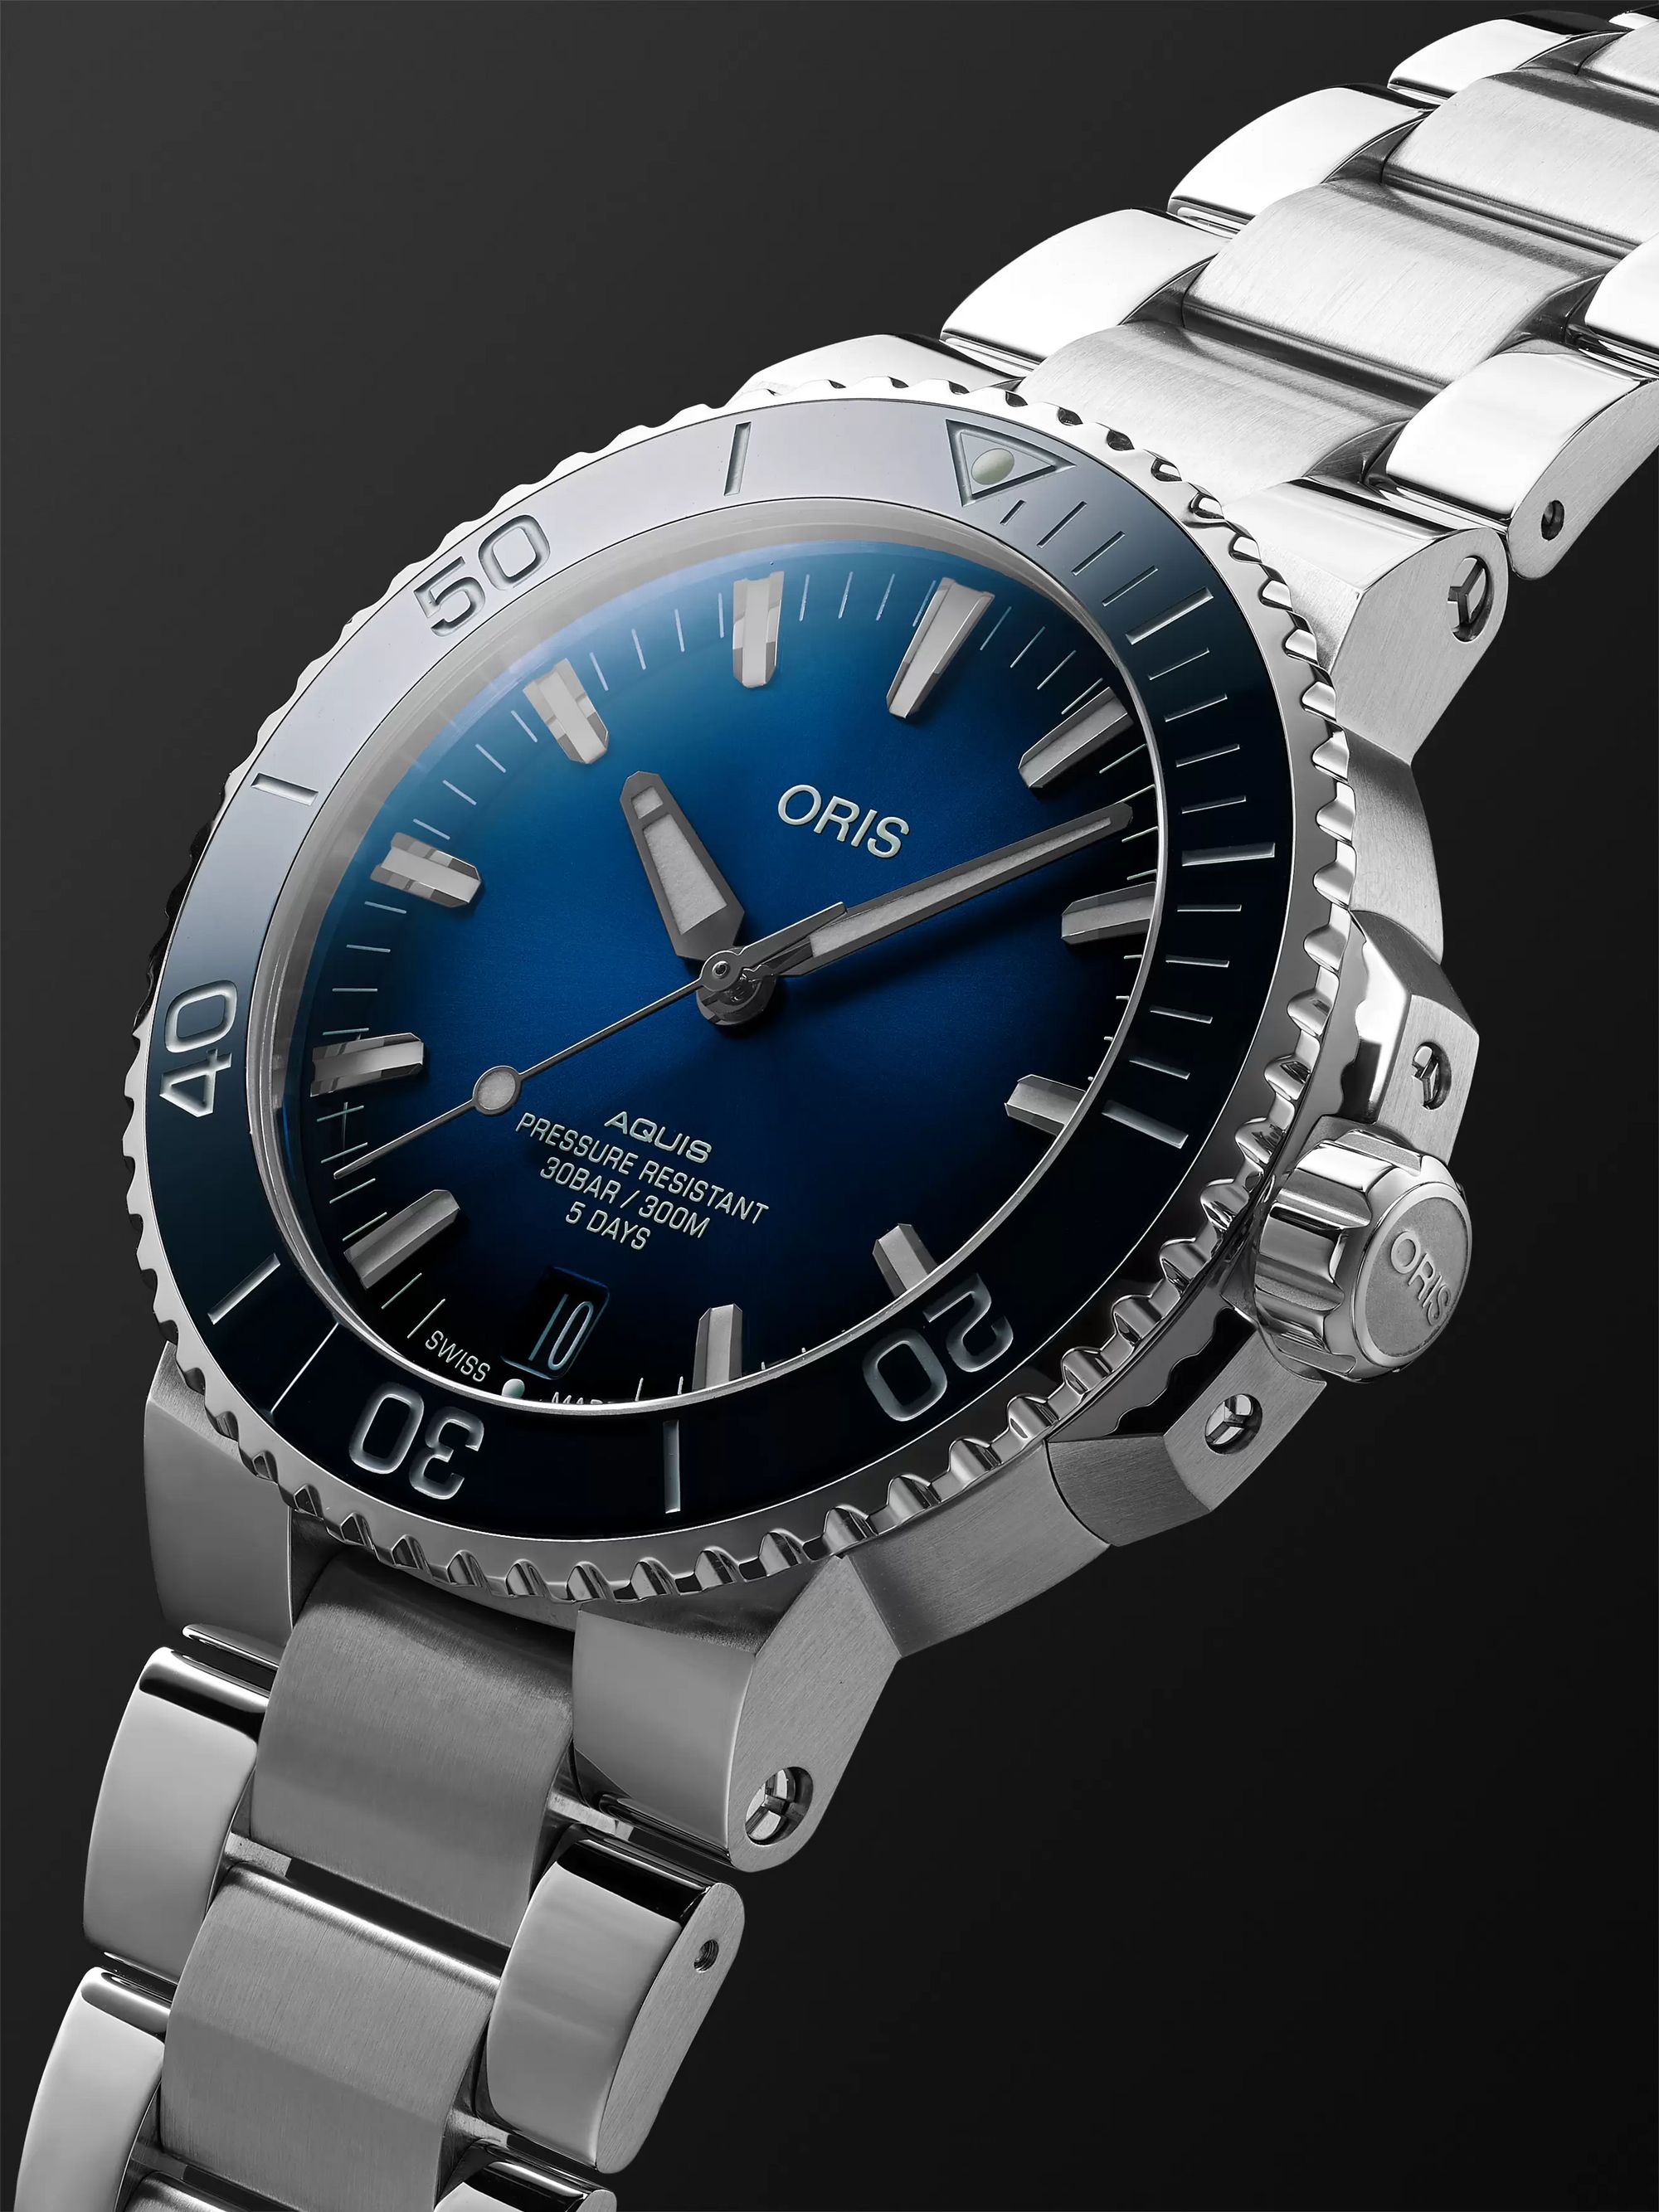 ORIS Aquis Date Calibre 400 Automatic 43.5mm Stainless Steel Watch, Ref. No. 01 400 7763 4135-07 8 24 09PEB